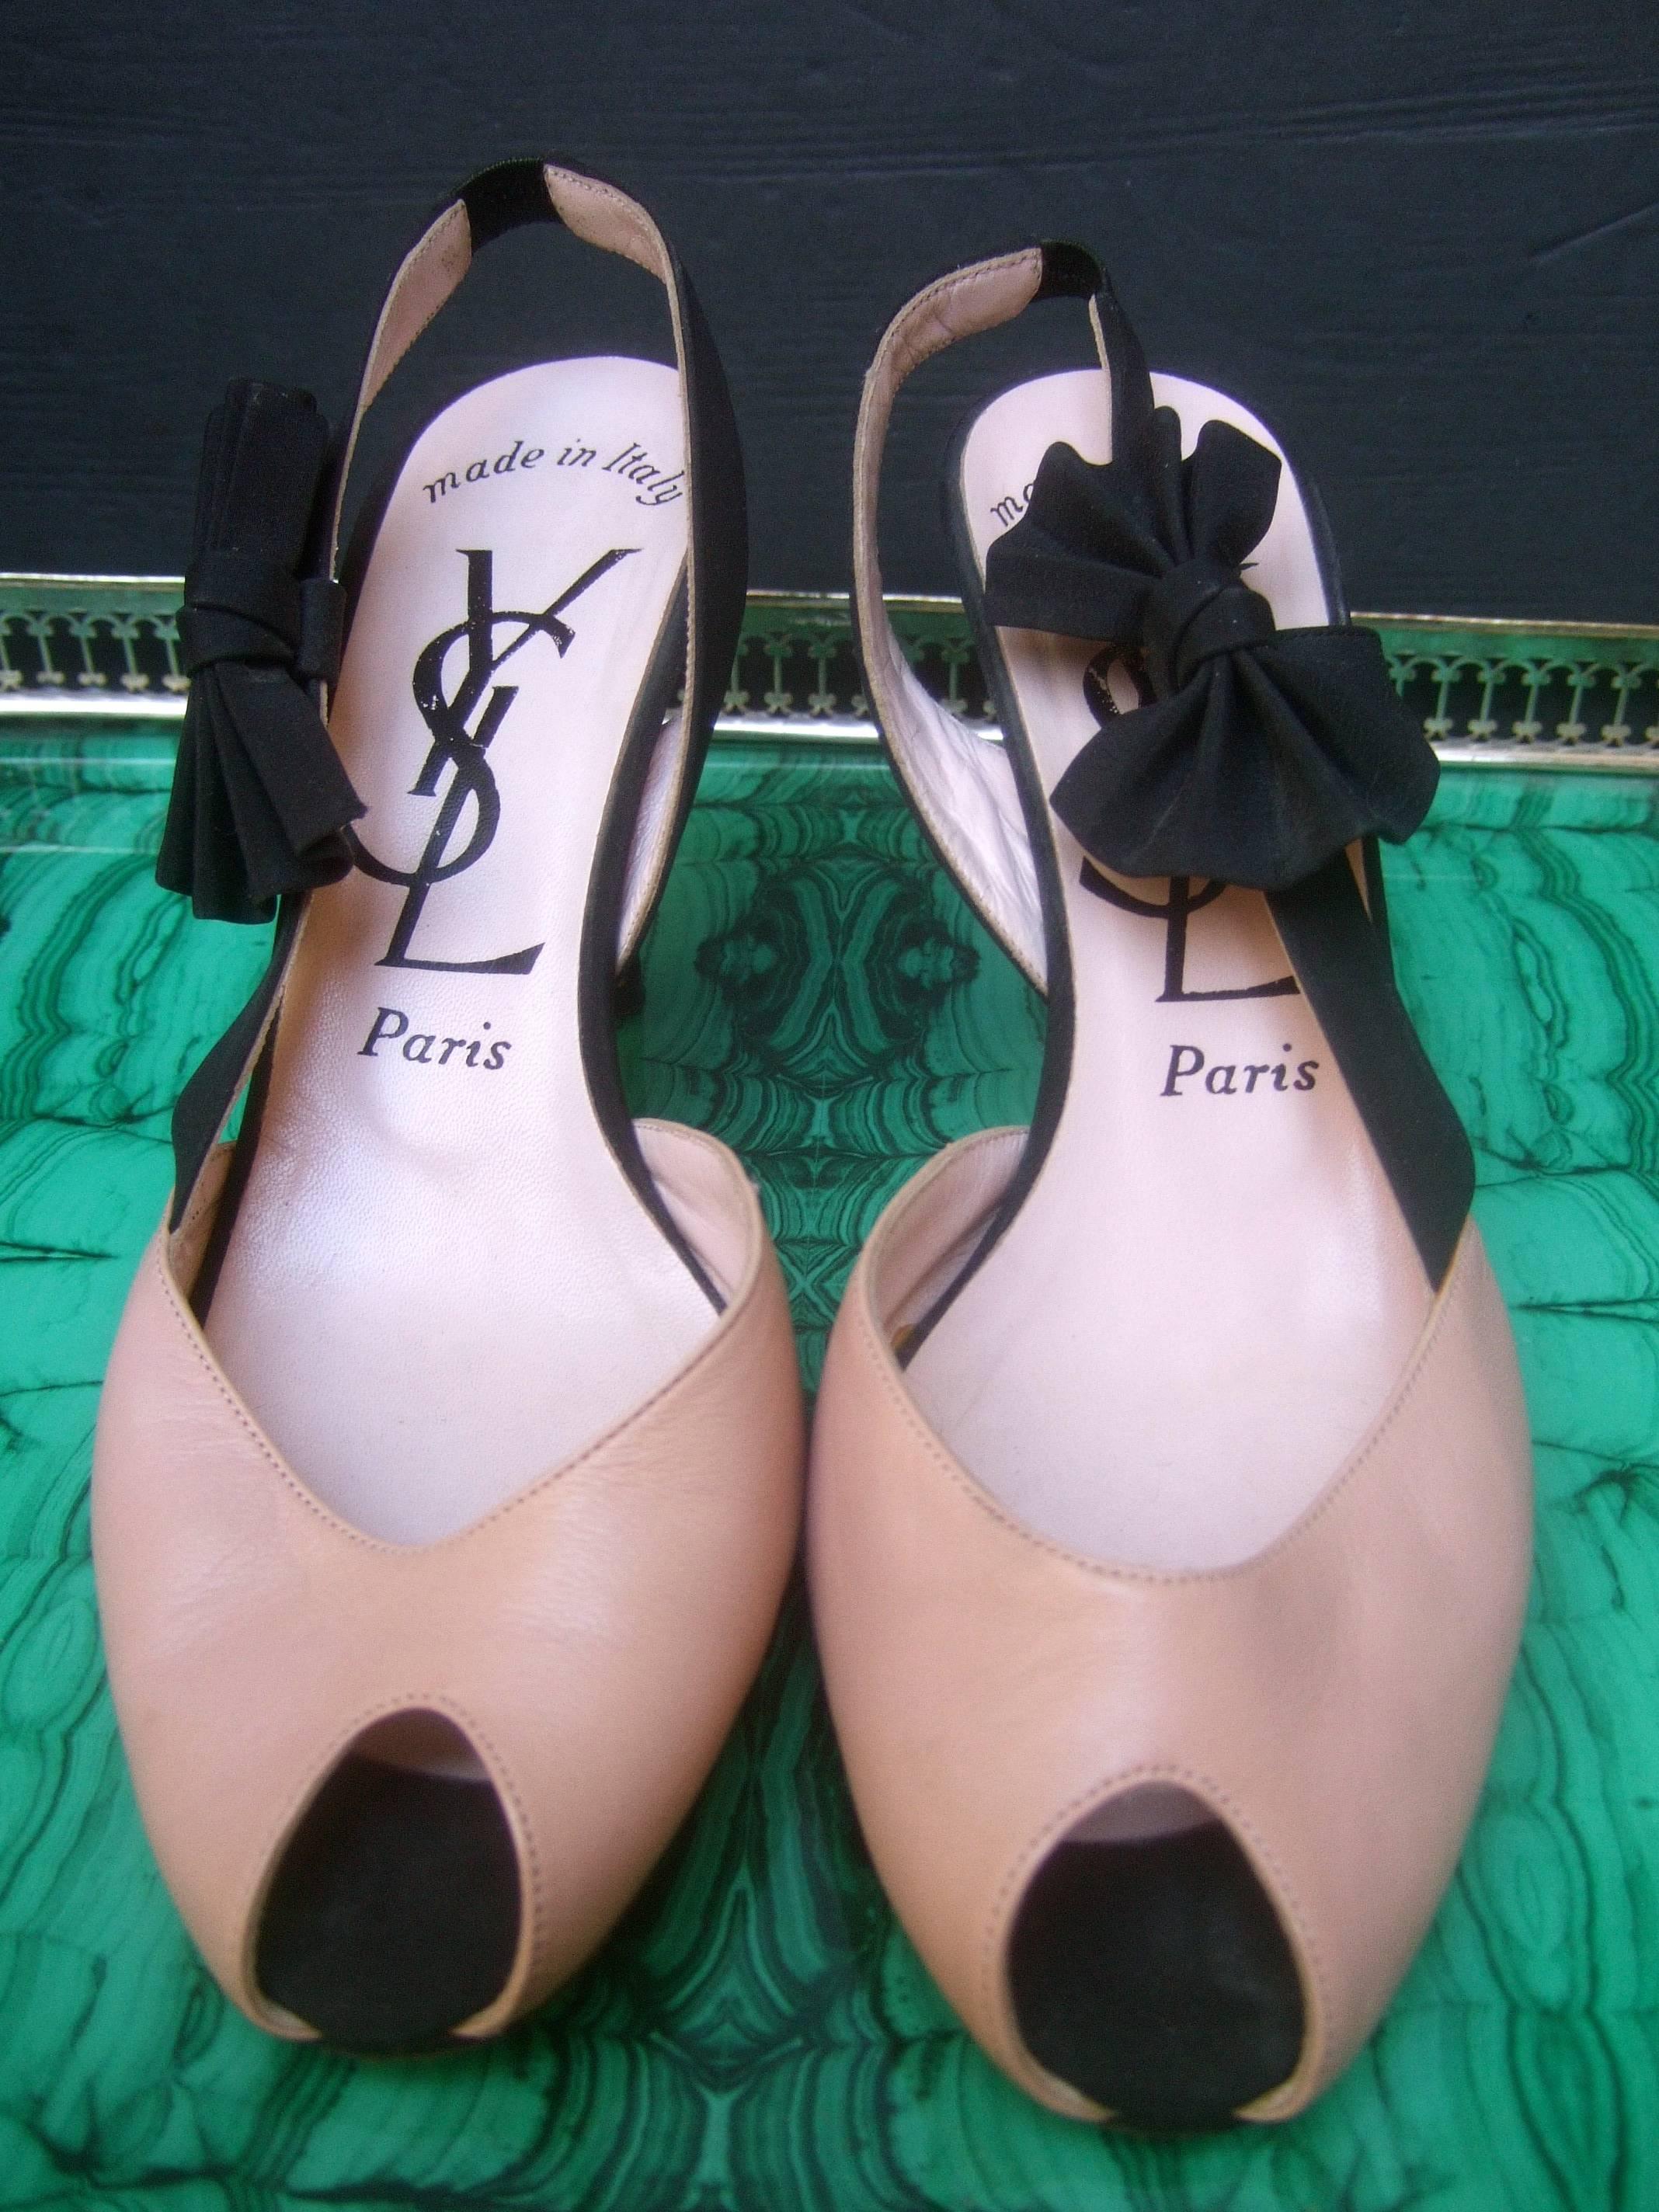 Yves Saint Laurent Paris leather peep toe pumps US Size 7.5 M
The Italian flesh tone leather shoes are accented with a black
cloth bow and matching black cloth covered heel 

Each shoe is accented with the black cloth bow detail 
The interior of the